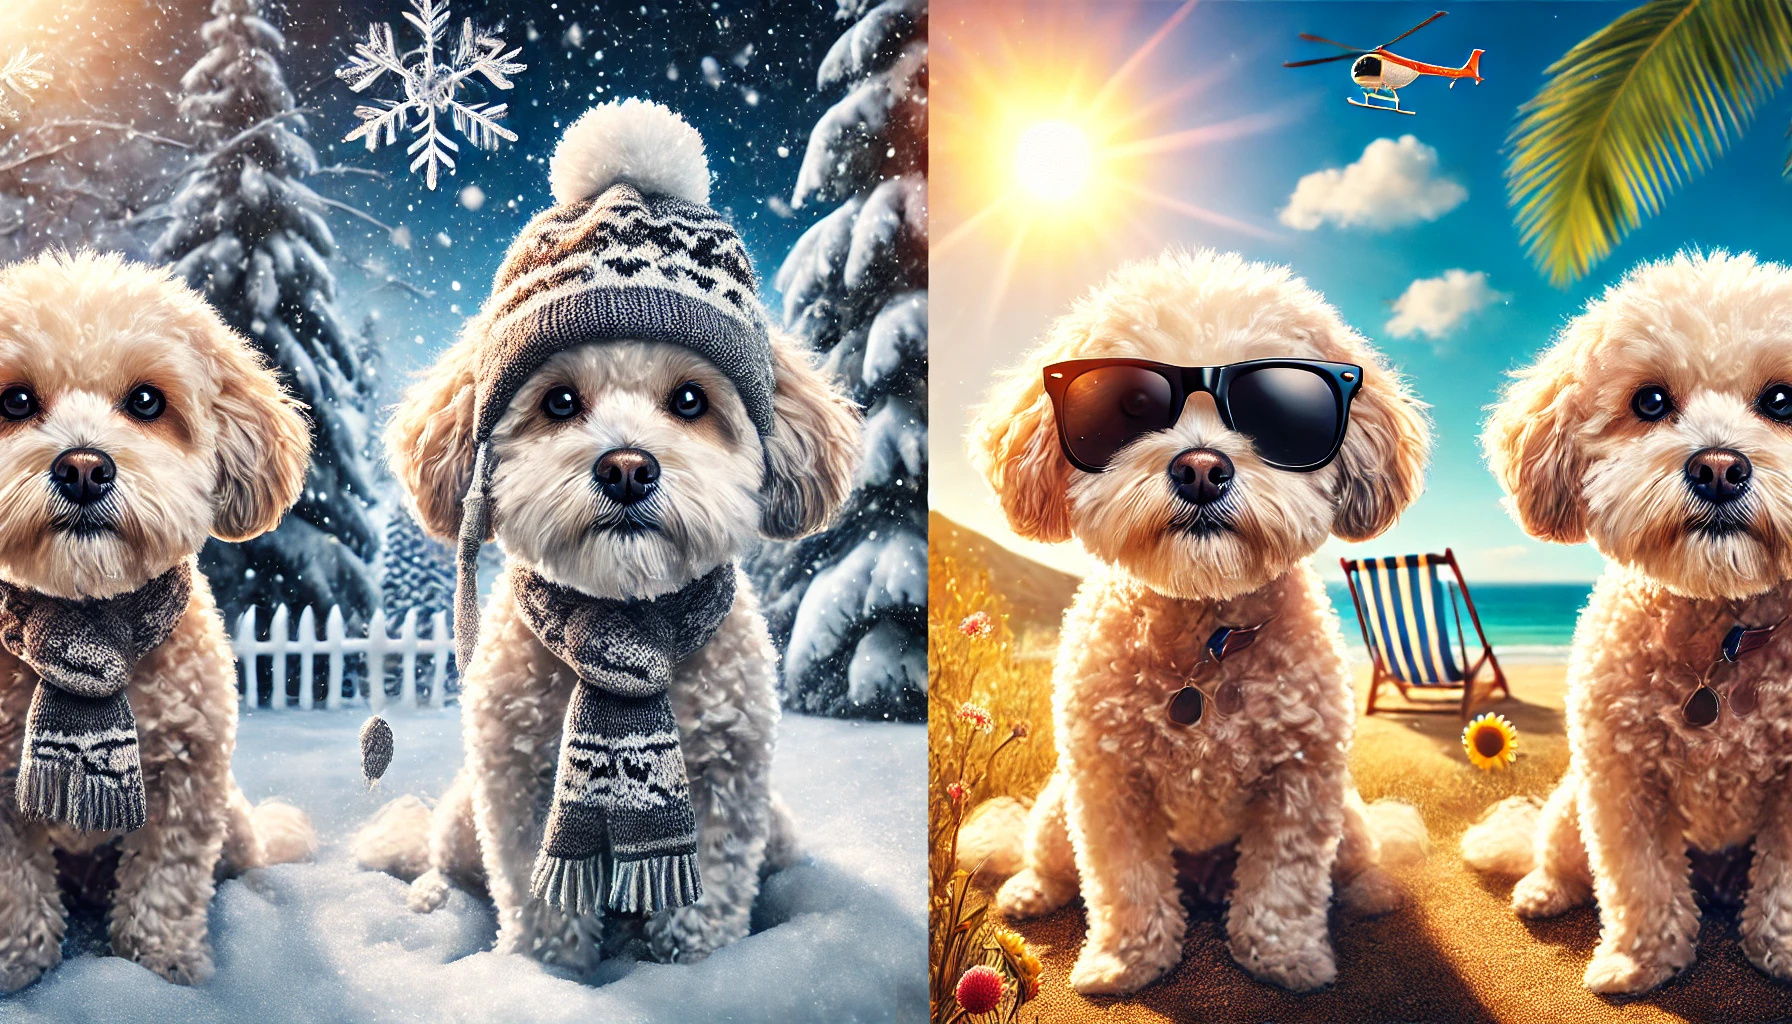  image of two Maltipoos side by side. One Maltipoo is in a winter setting and the other in a summer setting